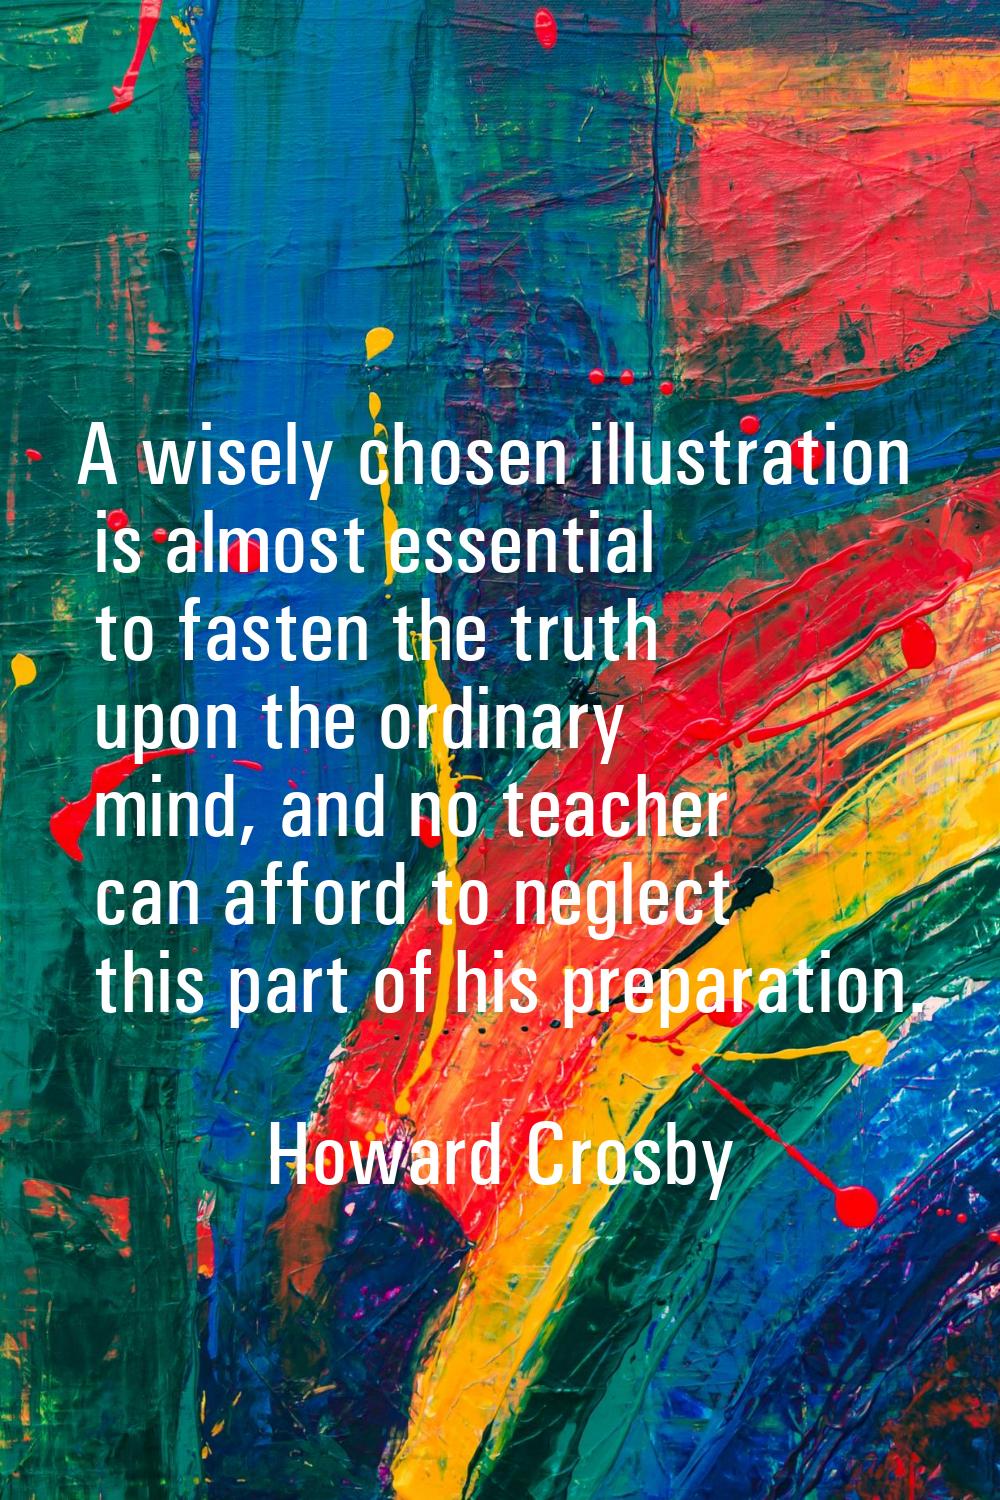 A wisely chosen illustration is almost essential to fasten the truth upon the ordinary mind, and no